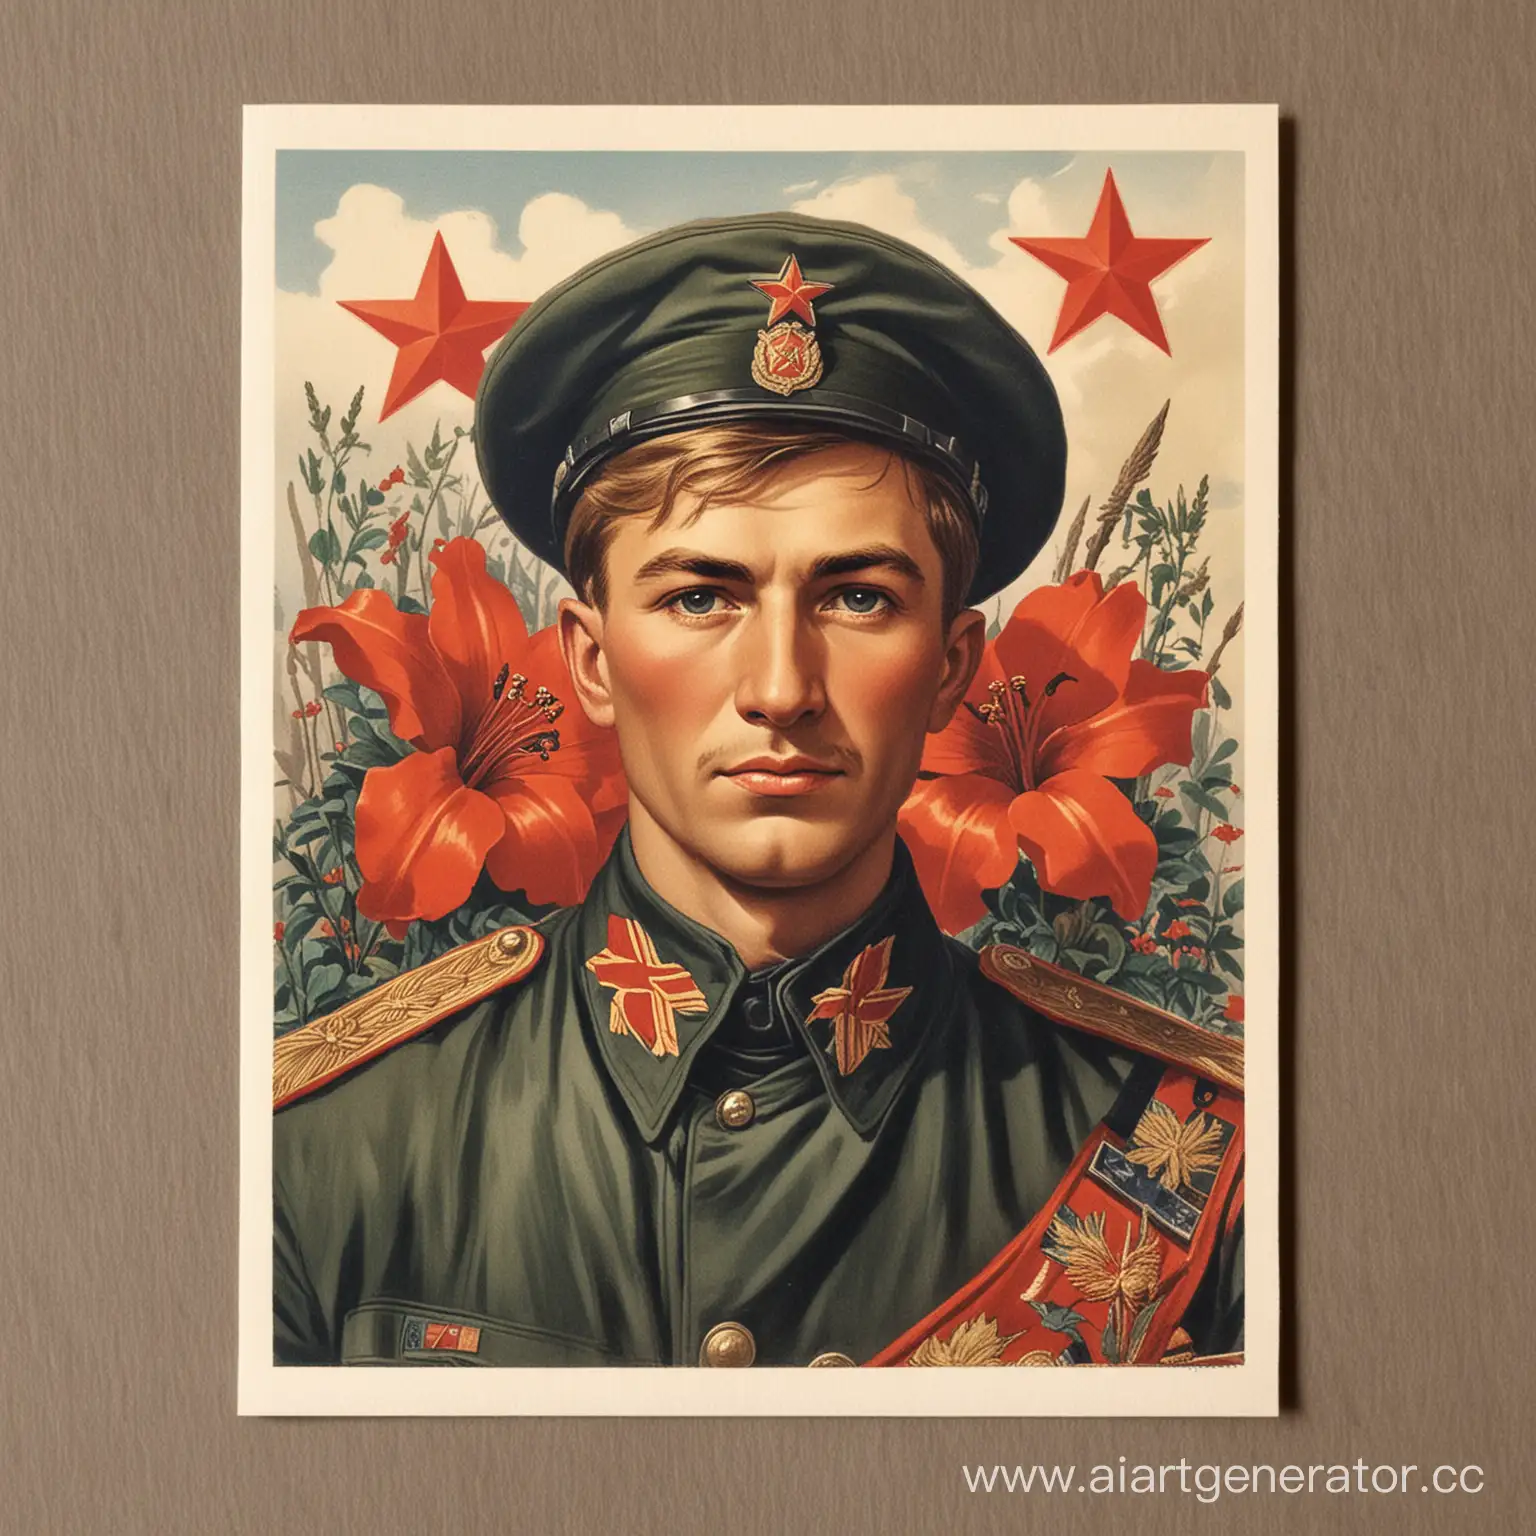 Postcard-Hero-Commemorating-the-Great-Patriotic-War-Victory-on-May-Ninth